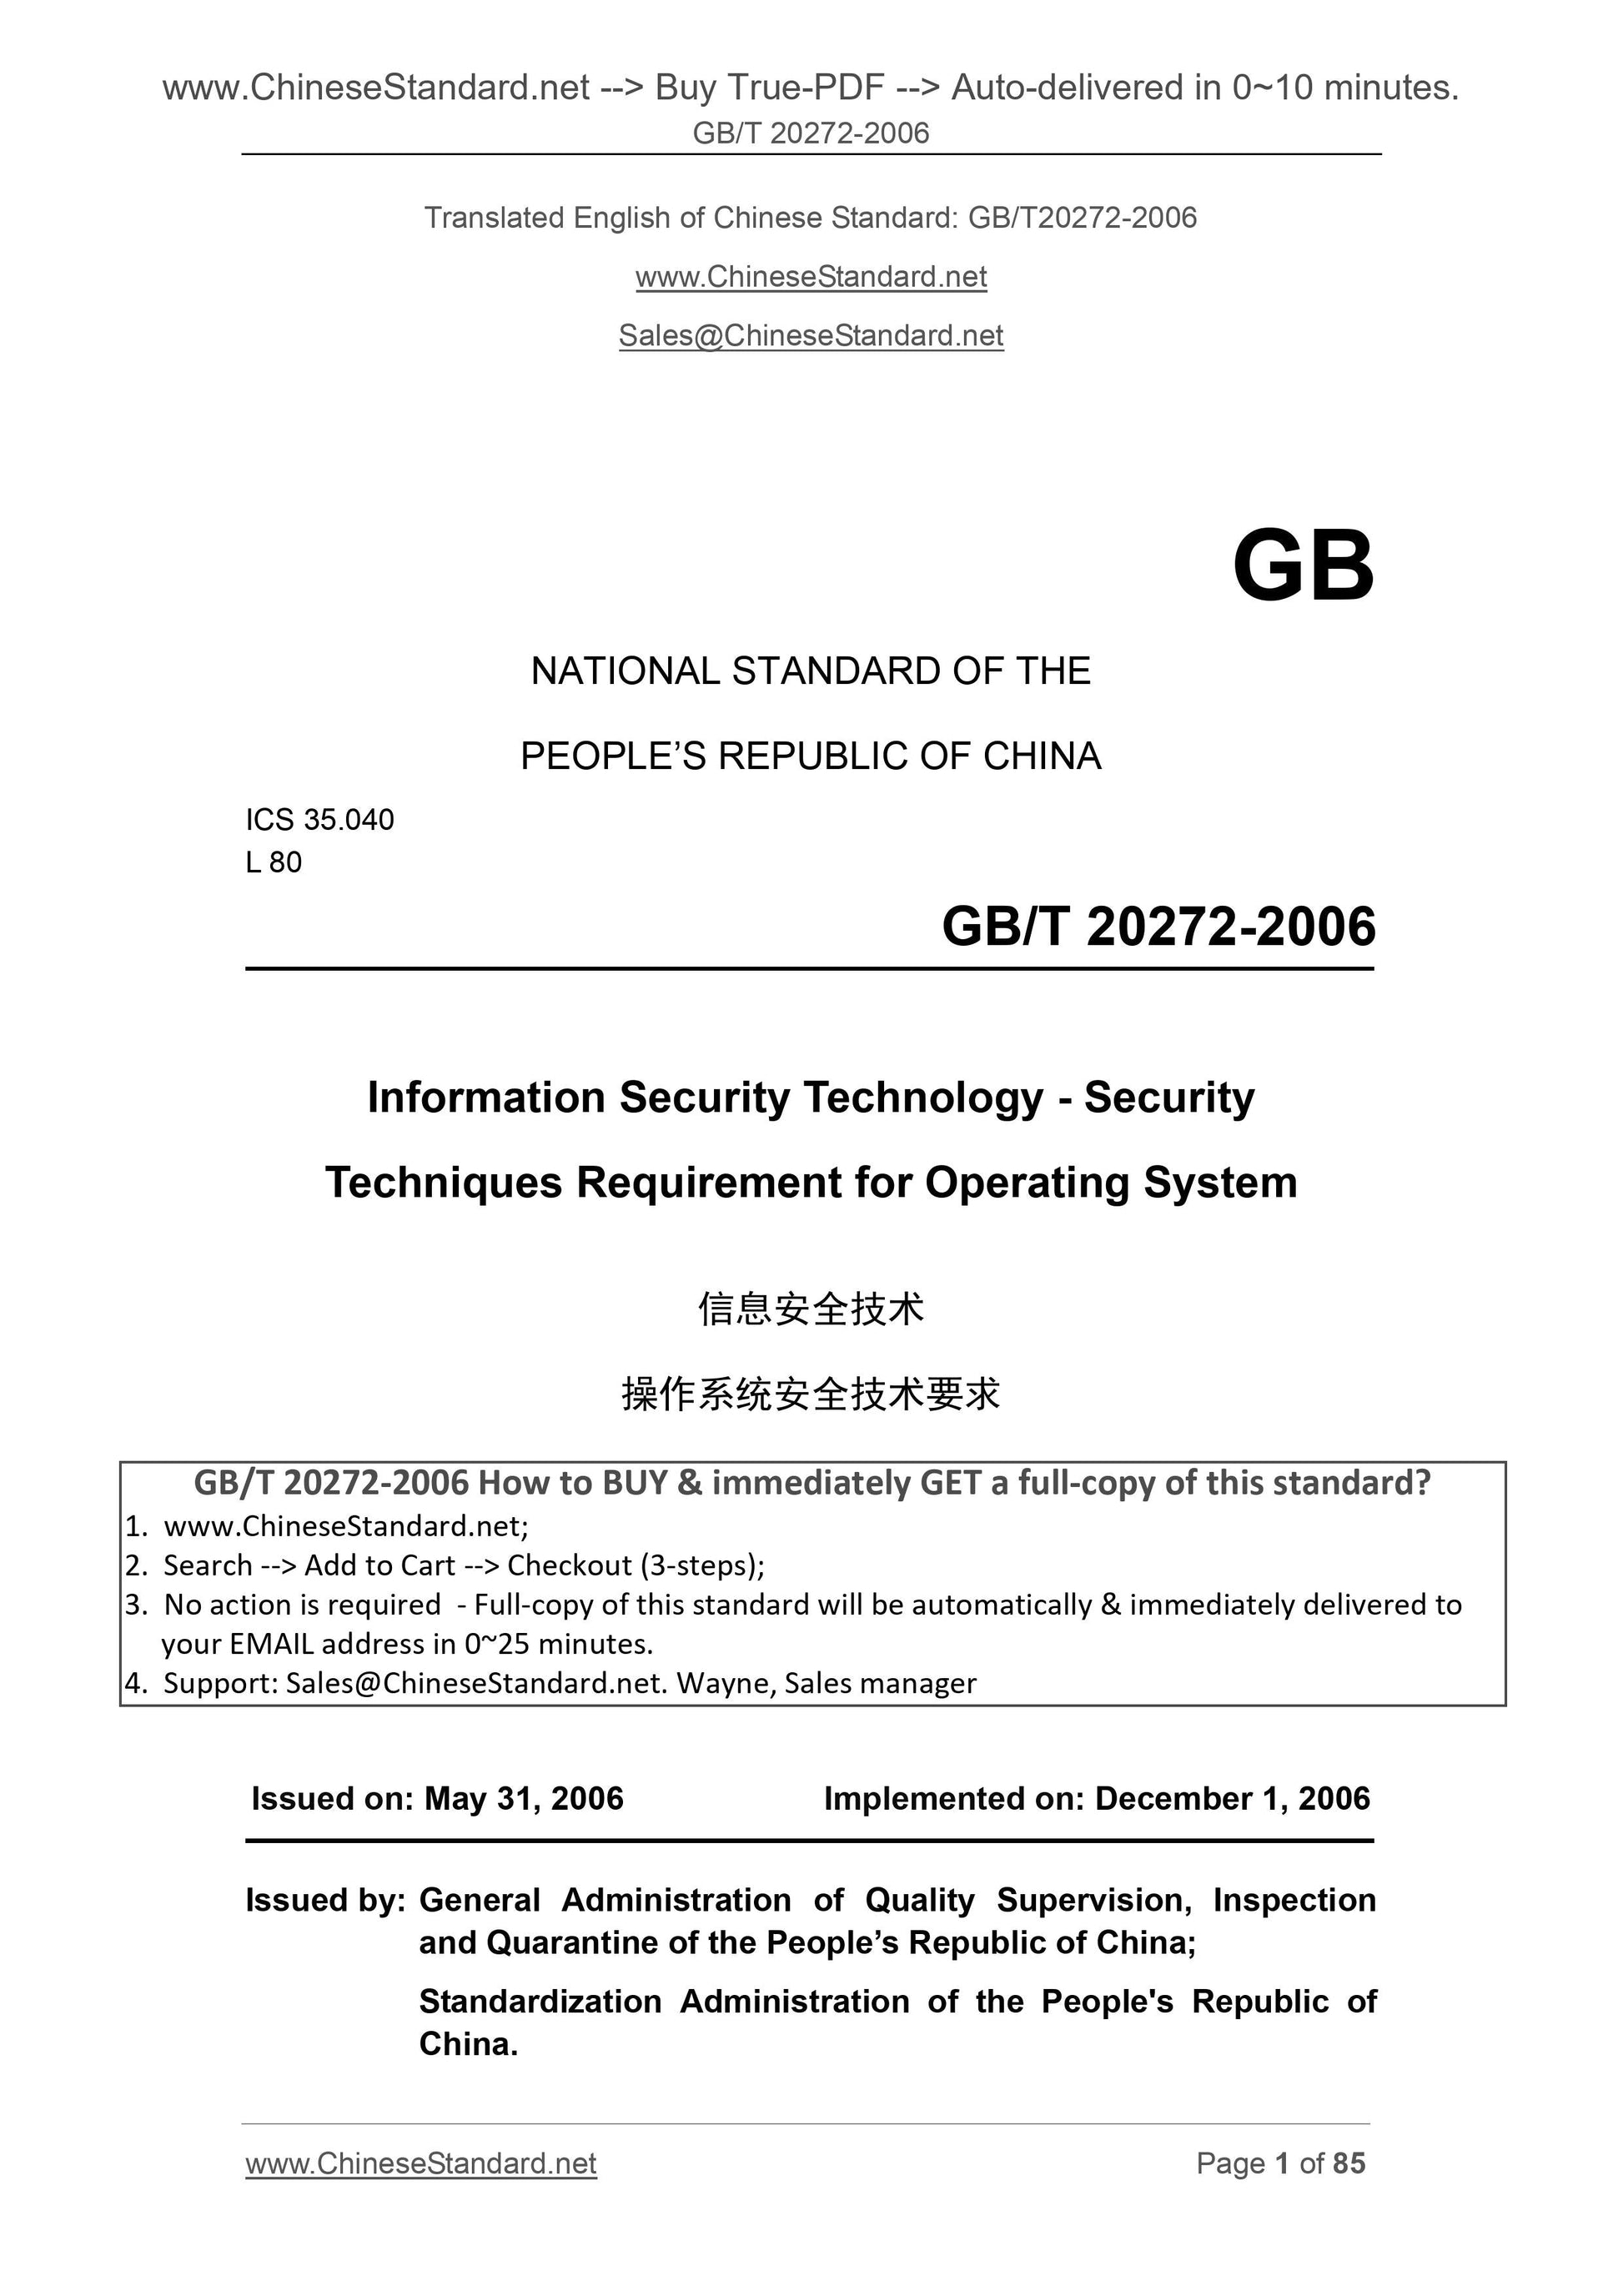 GB/T 20272-2006 Page 1